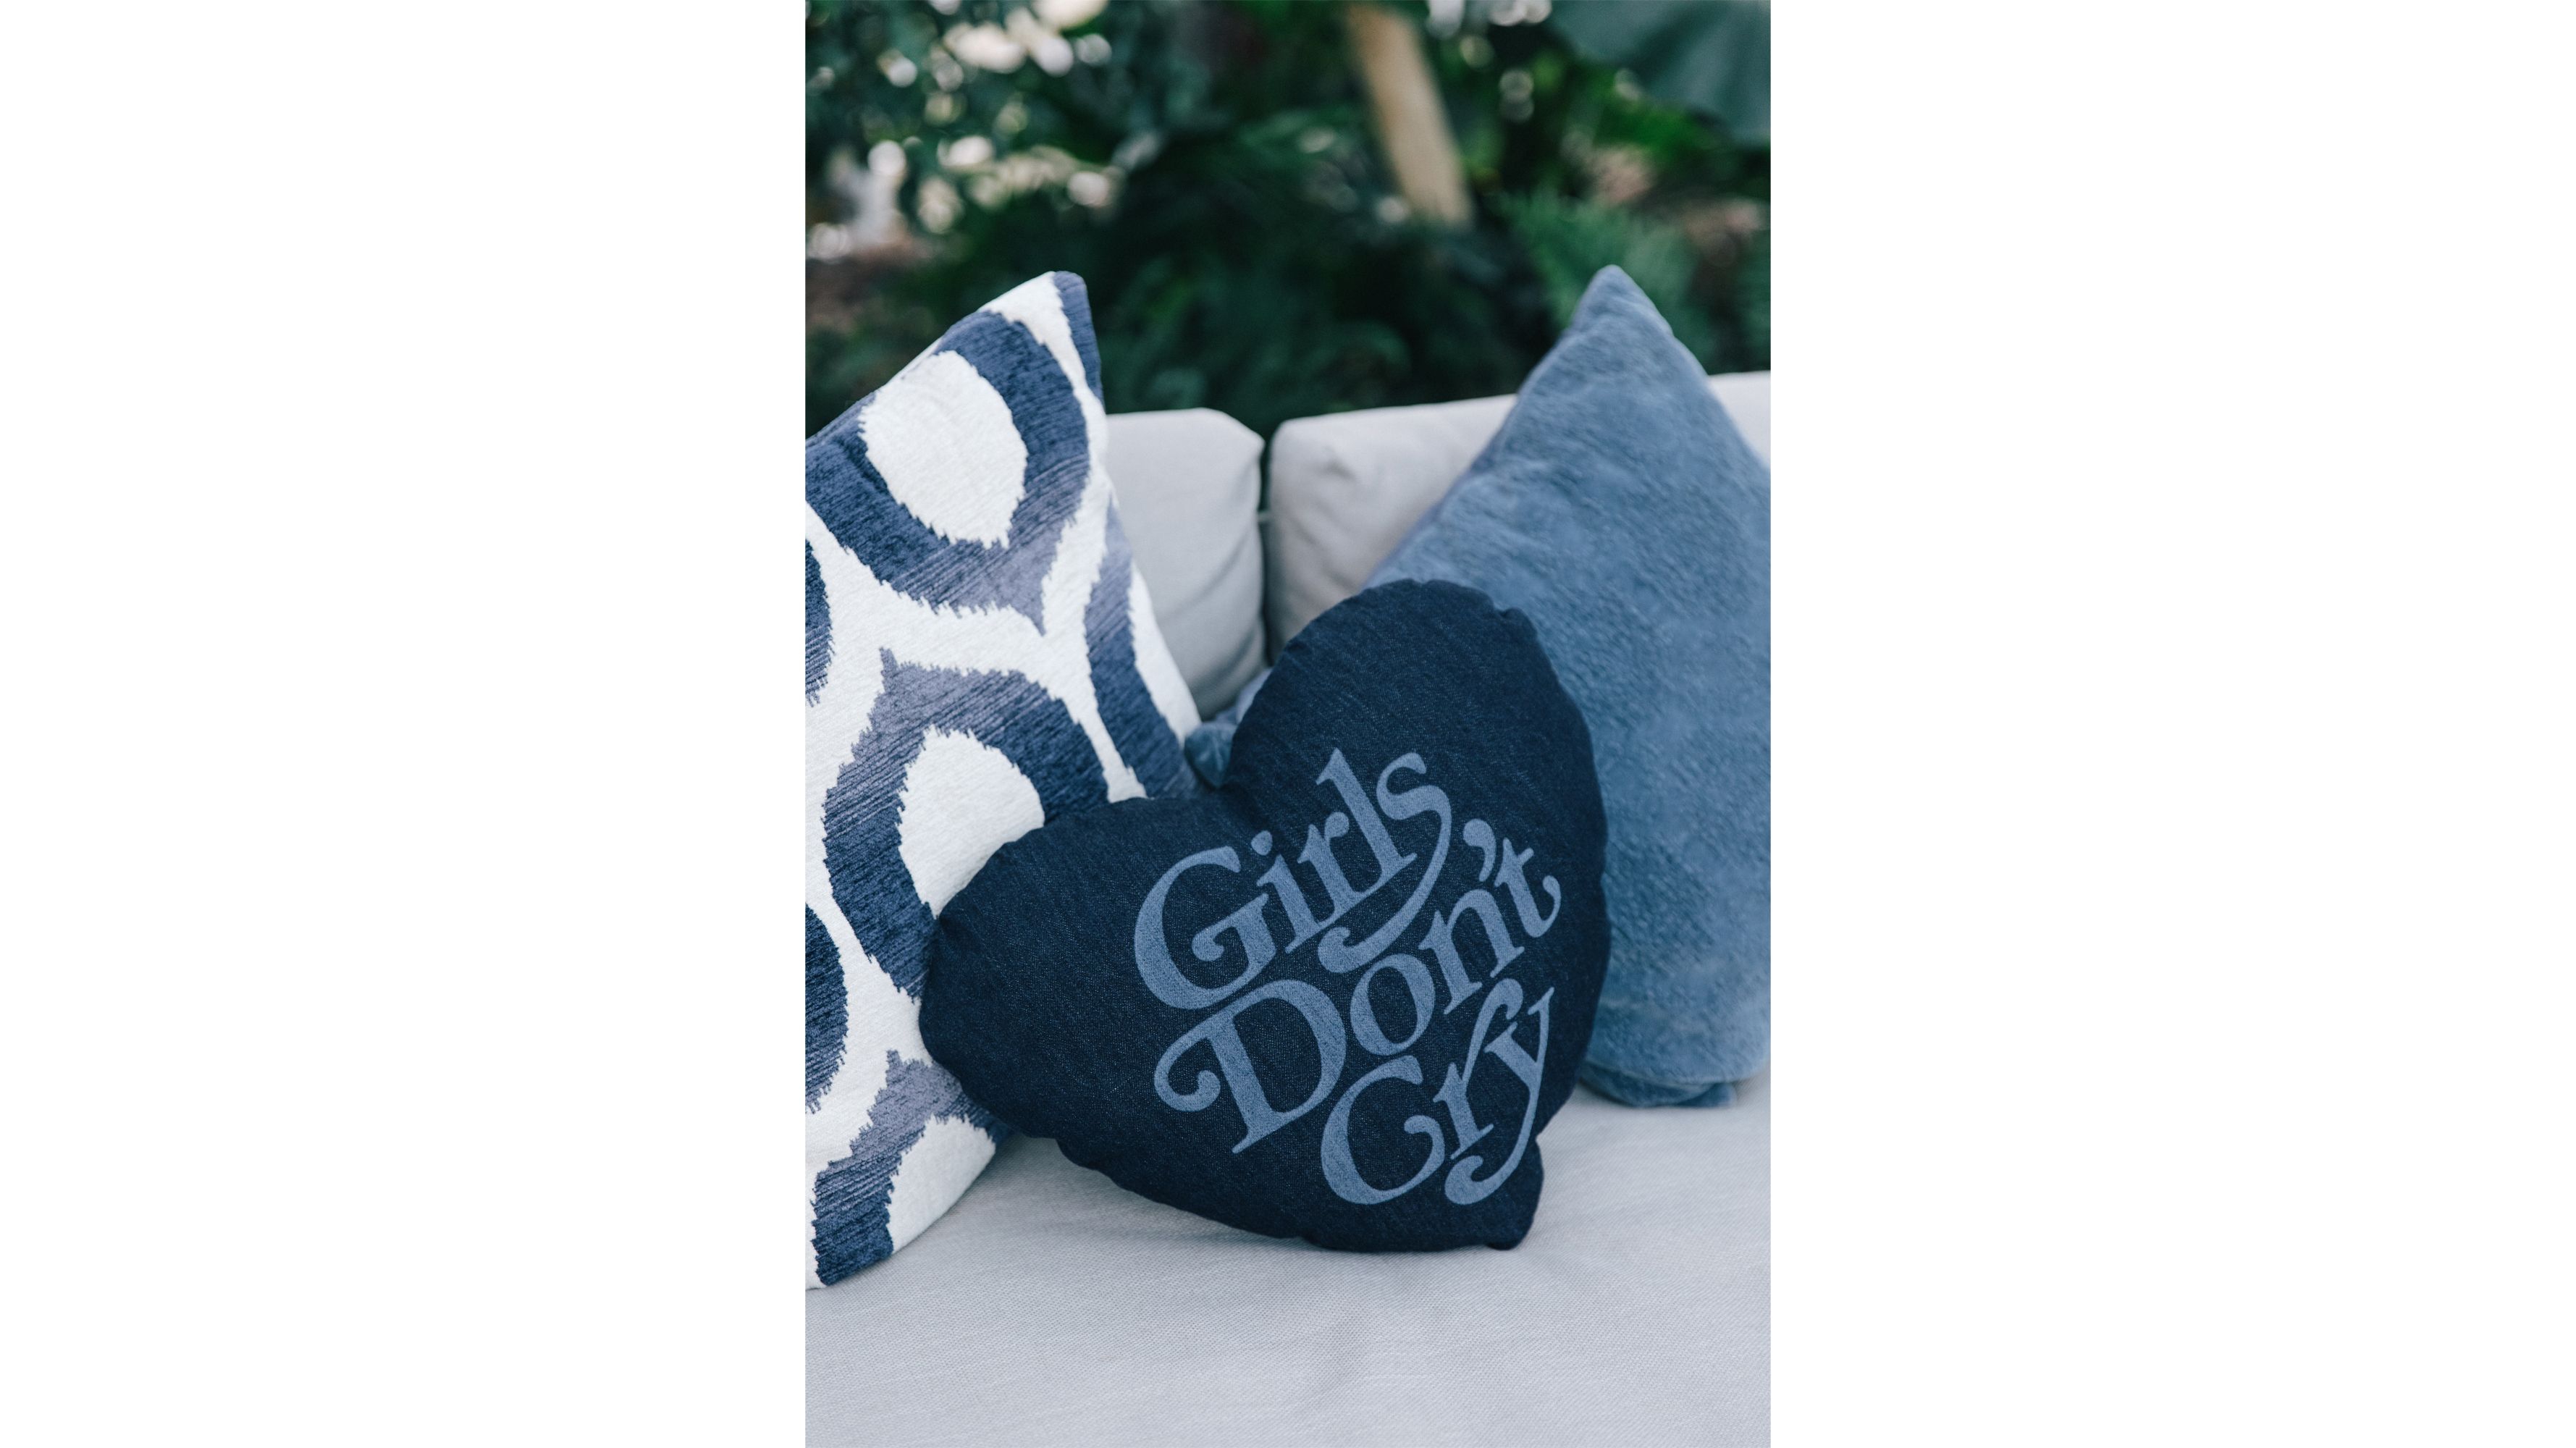 Levi's® x Girls Don't Cry Pillow